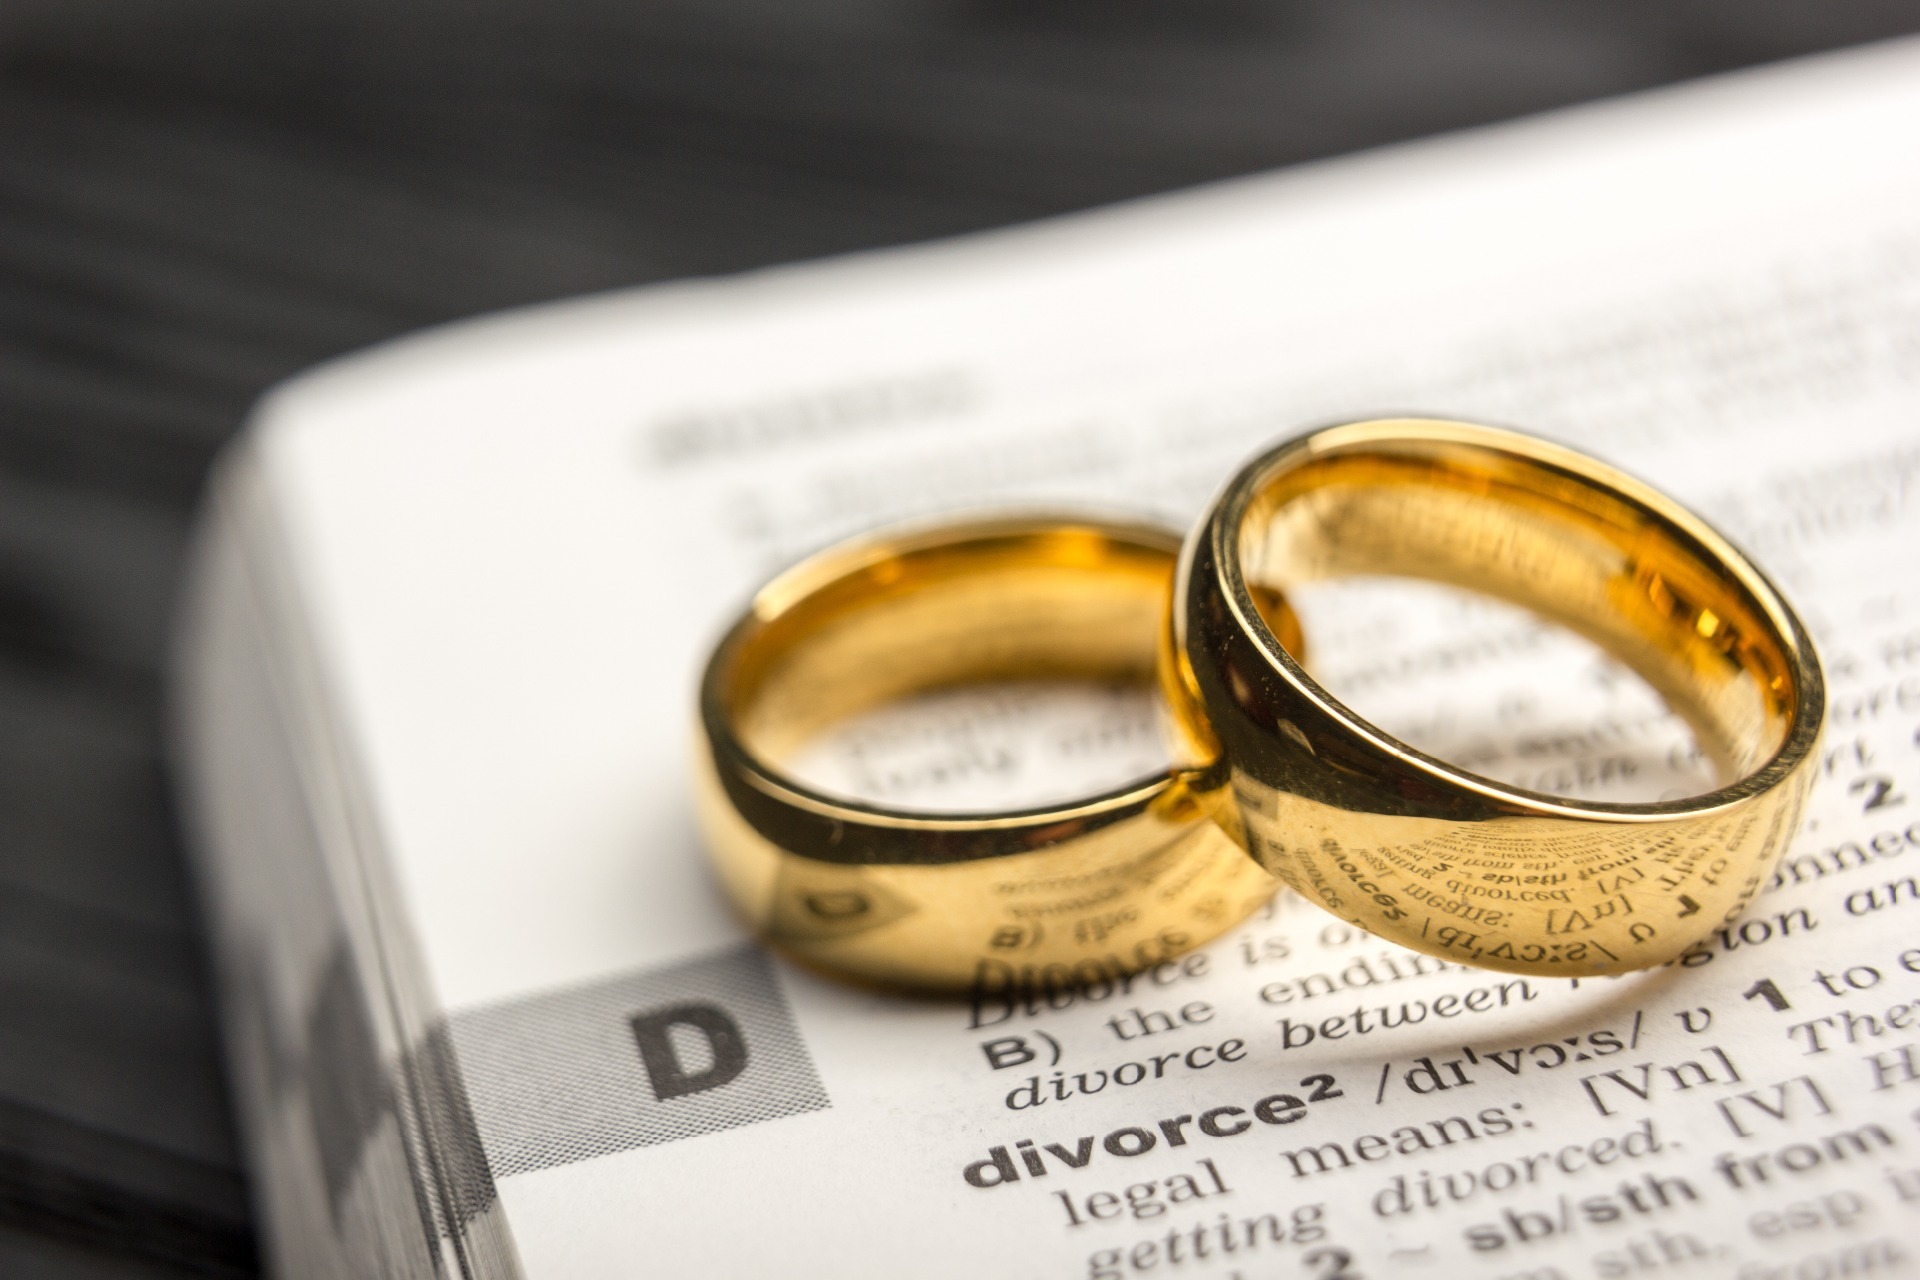 A dictionary showing 'Divorce' with two wedding rings resting on top.